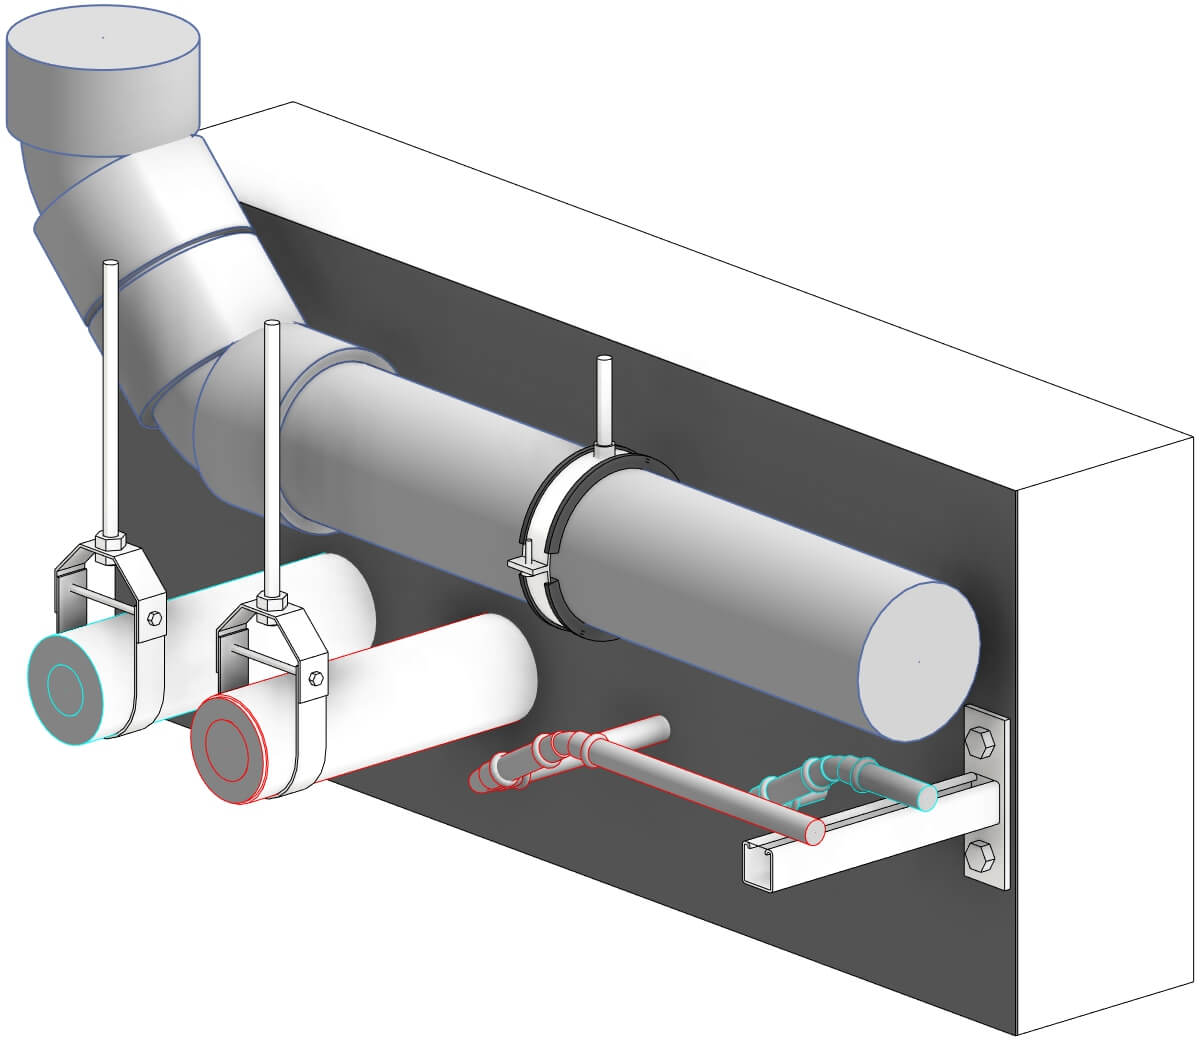 pipe hangers and supports modeled in Revit